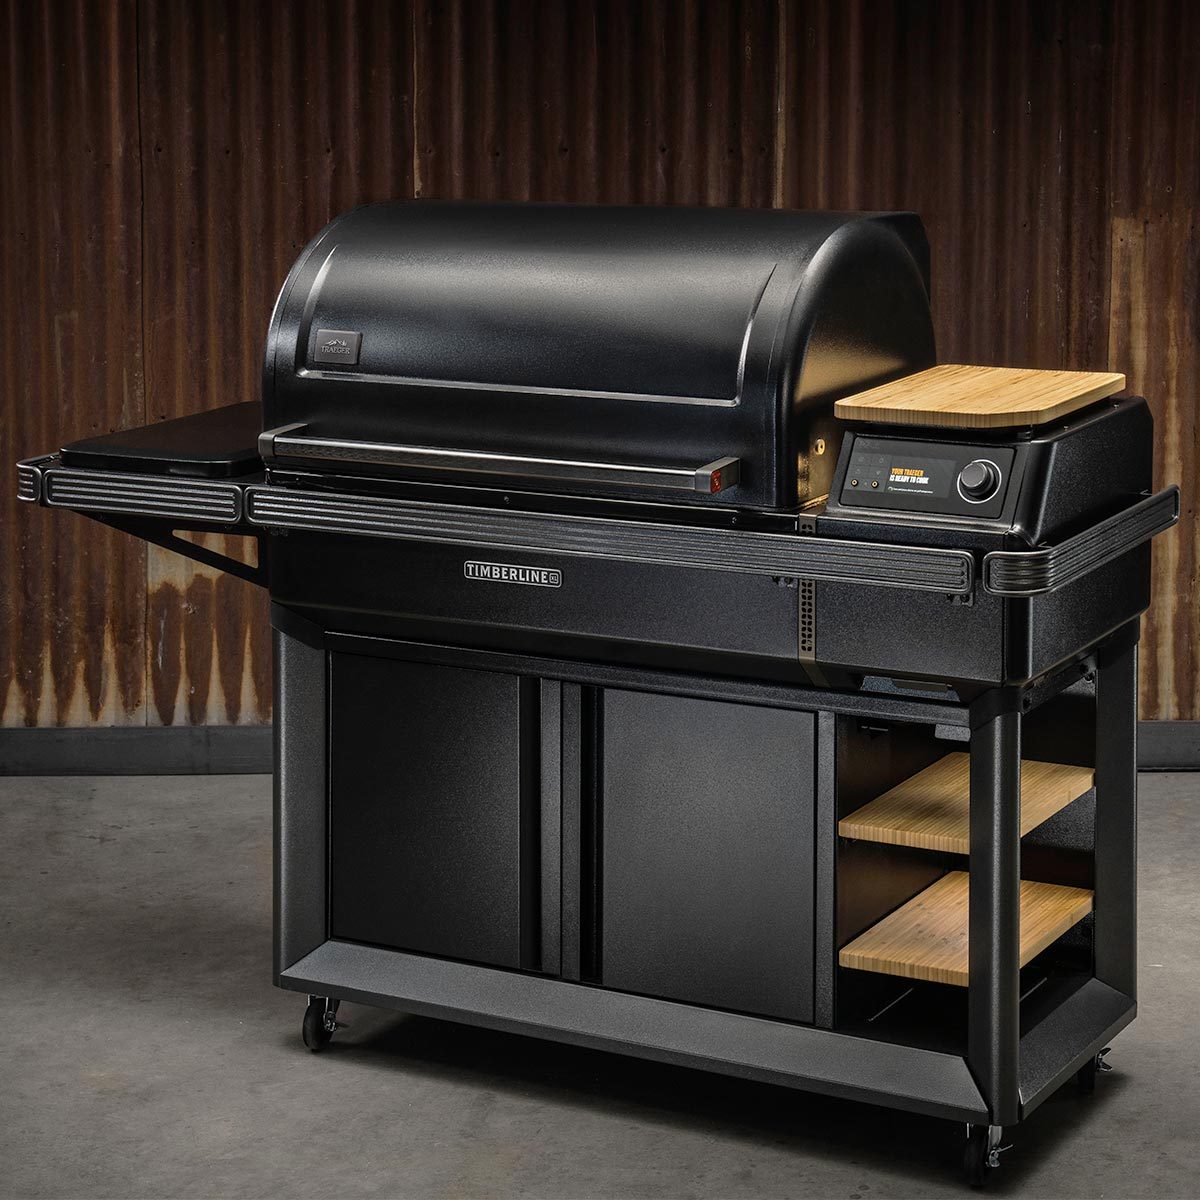 A Grill with Wi-Fi: Traeger's All-New Timberline XL Grill | Family Handyman